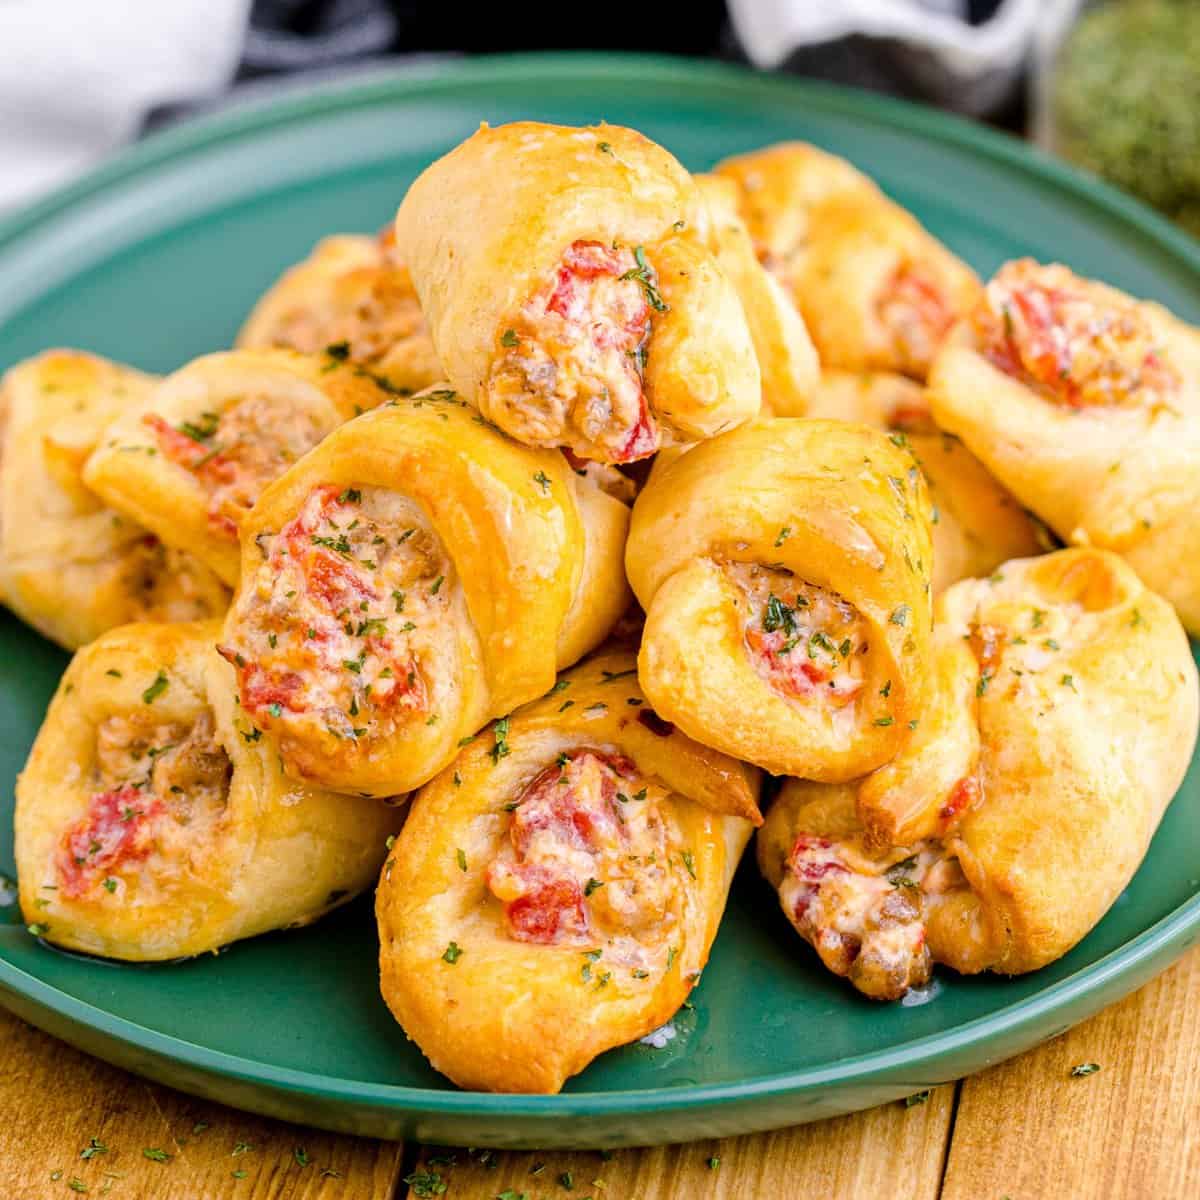 Crescent Wrapped Salami Rolls - Cooks Well With Others